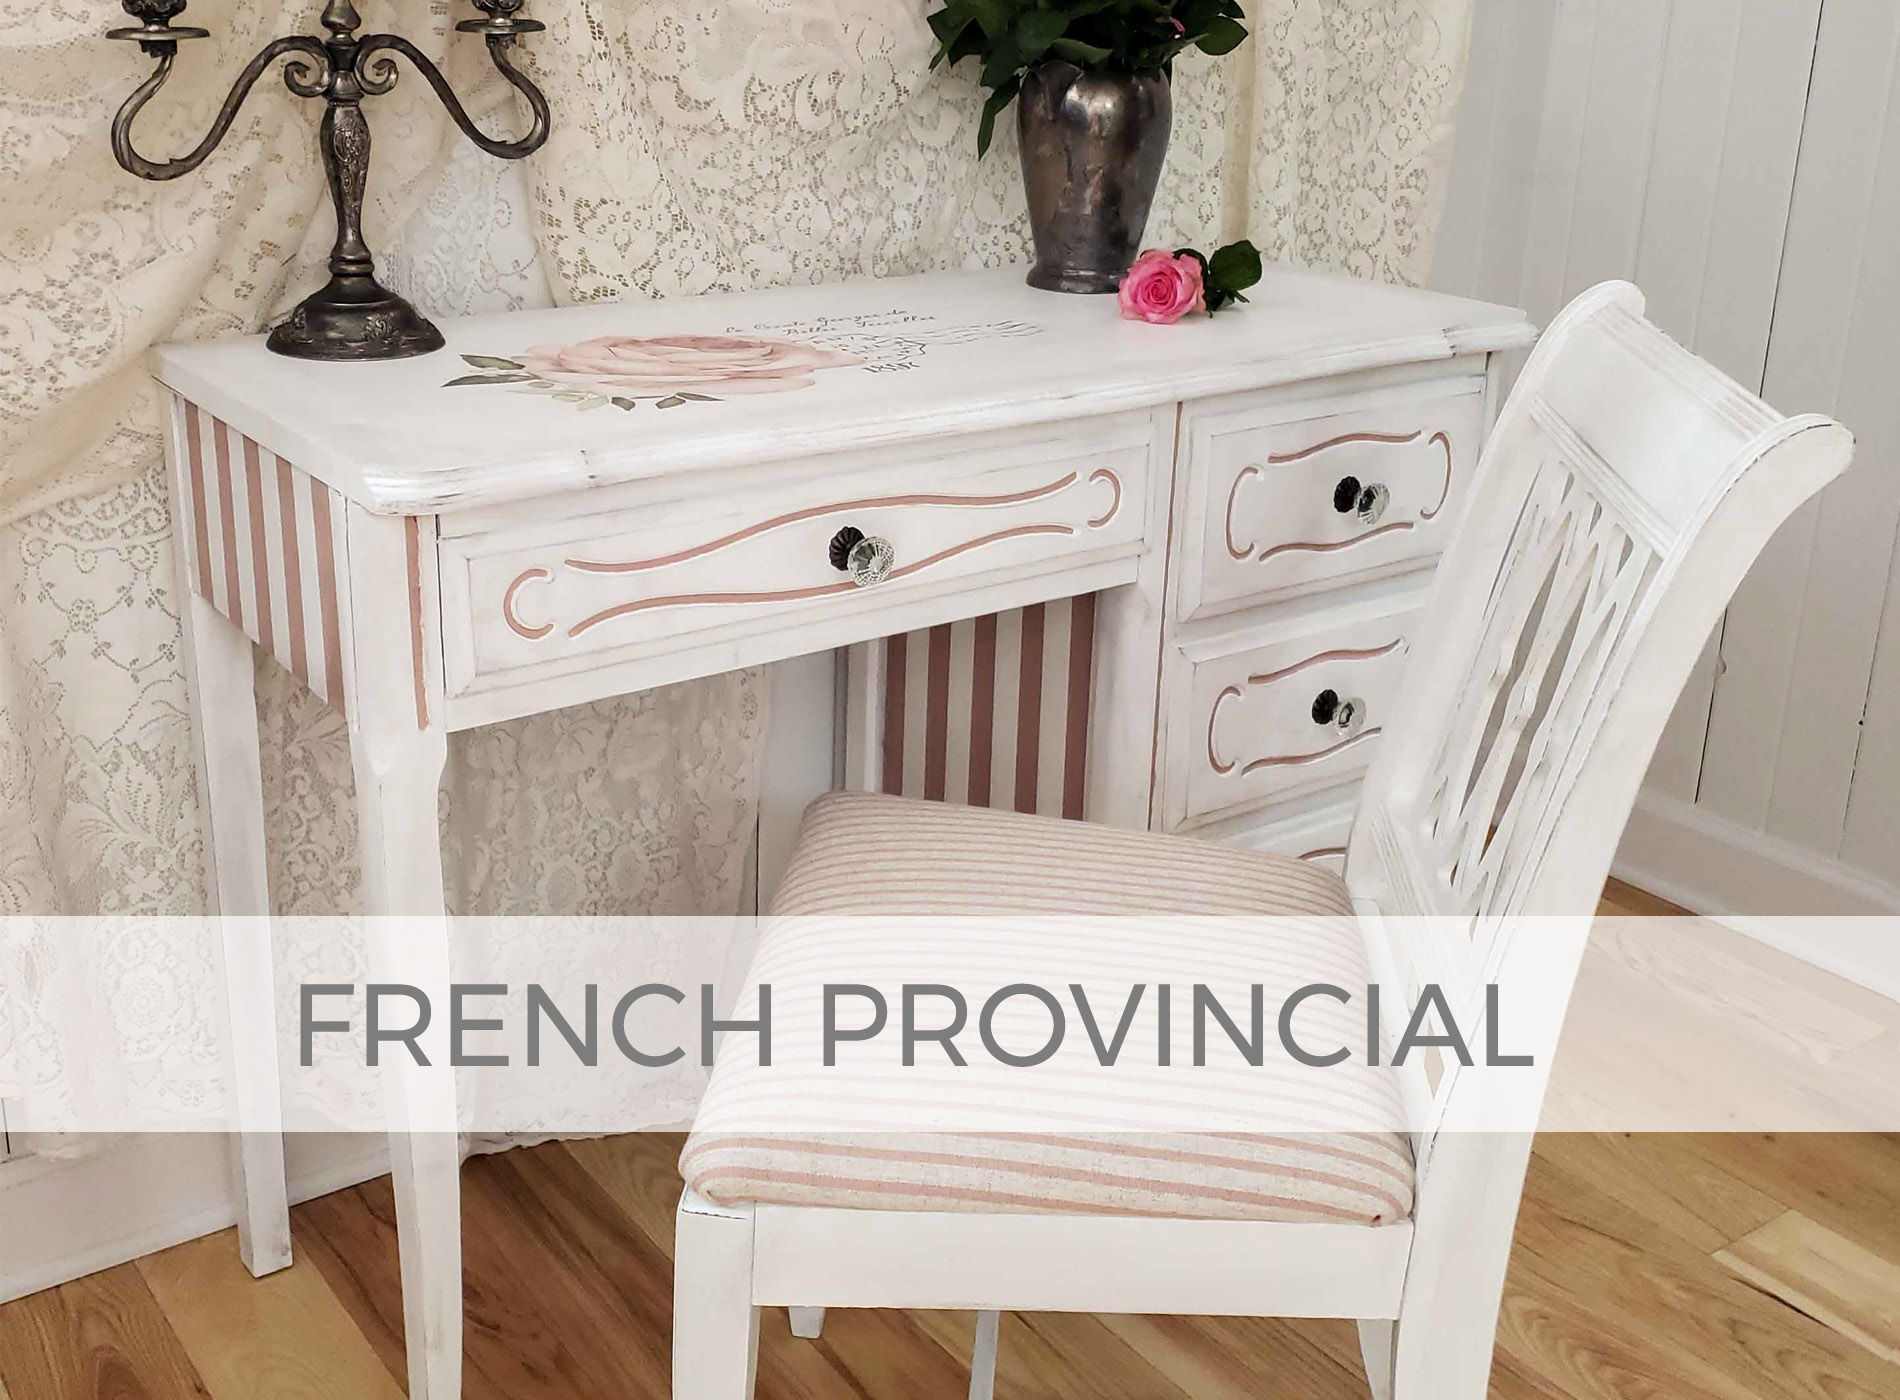 Shabby Chic French Provincial Desk by Larissa of Prodigal Pieces | prodigalpieces.com